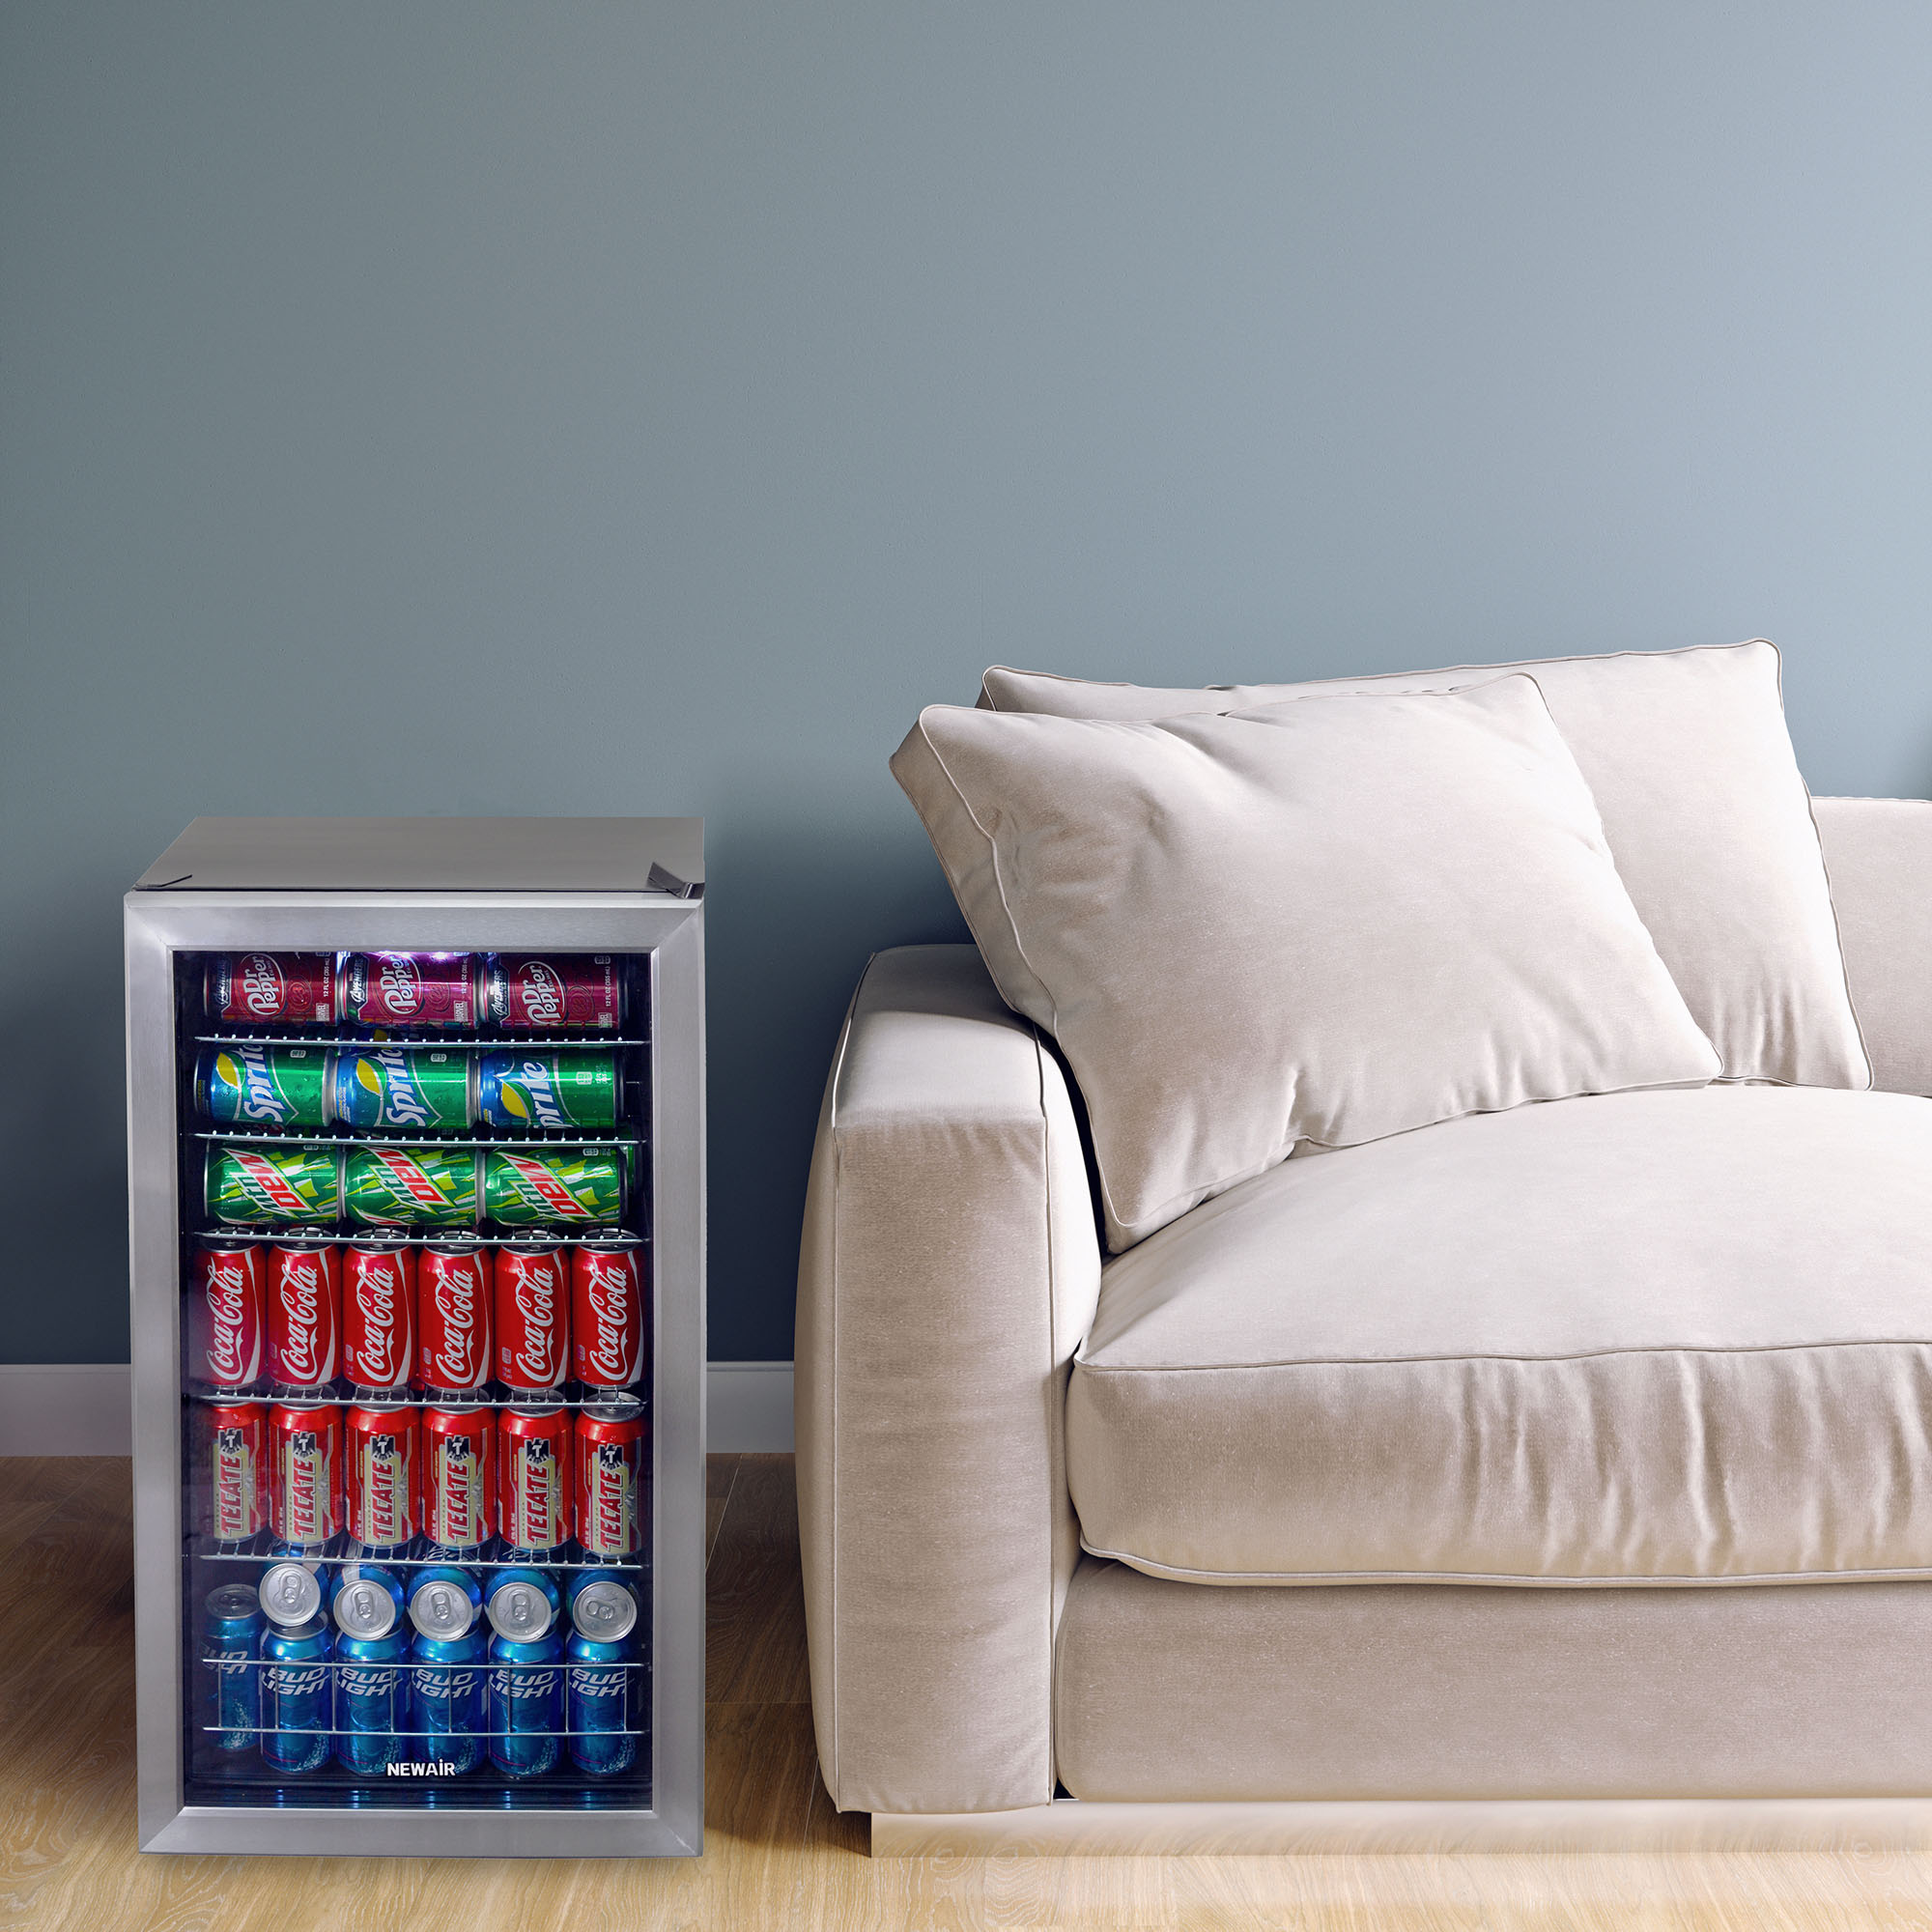 Newair Beverage Refrigerator Cooler |126 Cans Free Standing with Glass Door - image 5 of 18